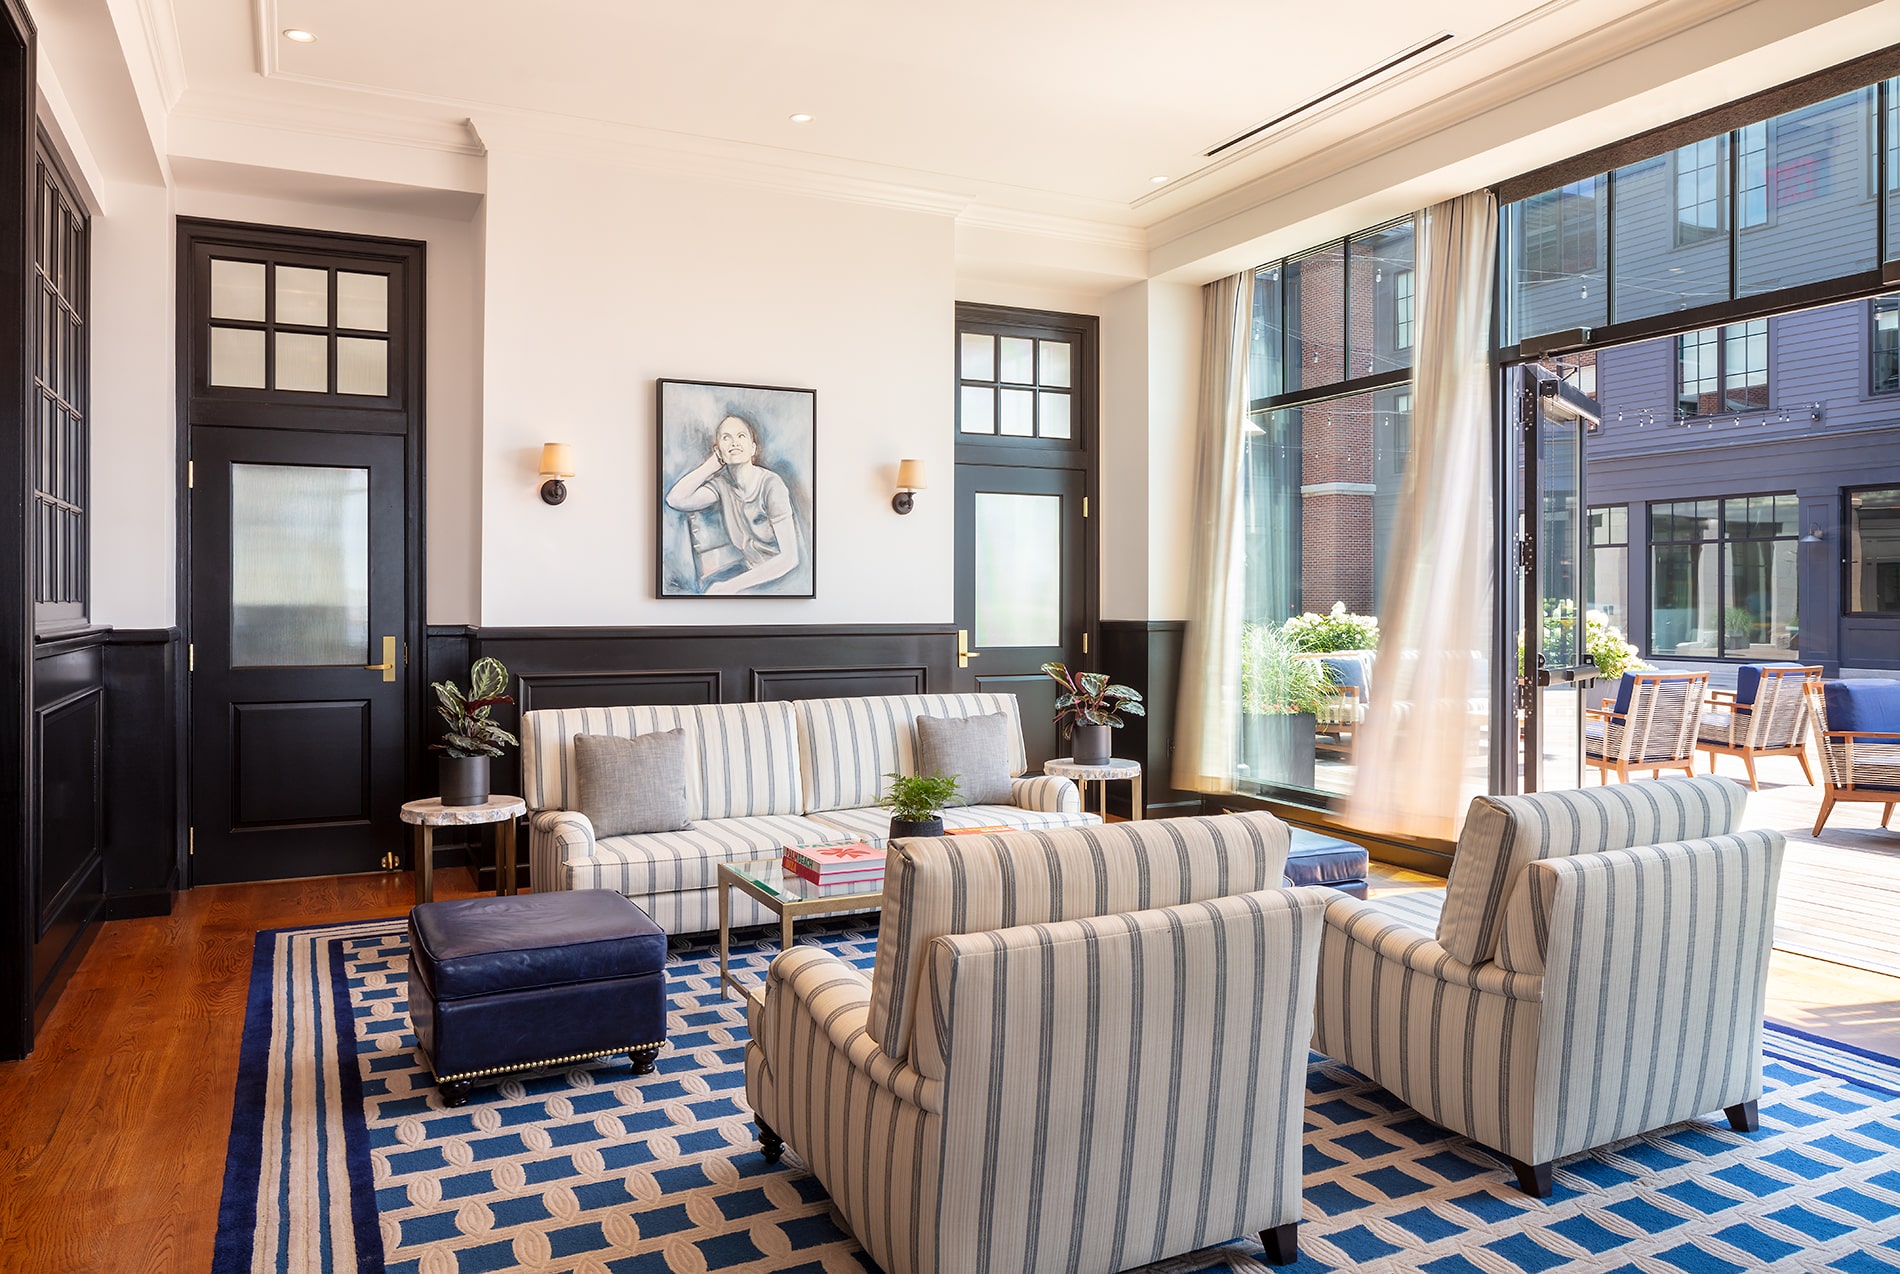 Modern living room with striped sofas, blue rug, and large windows leading to a balcony in a Newport RI hotel. A portrait hangs above a black console table.